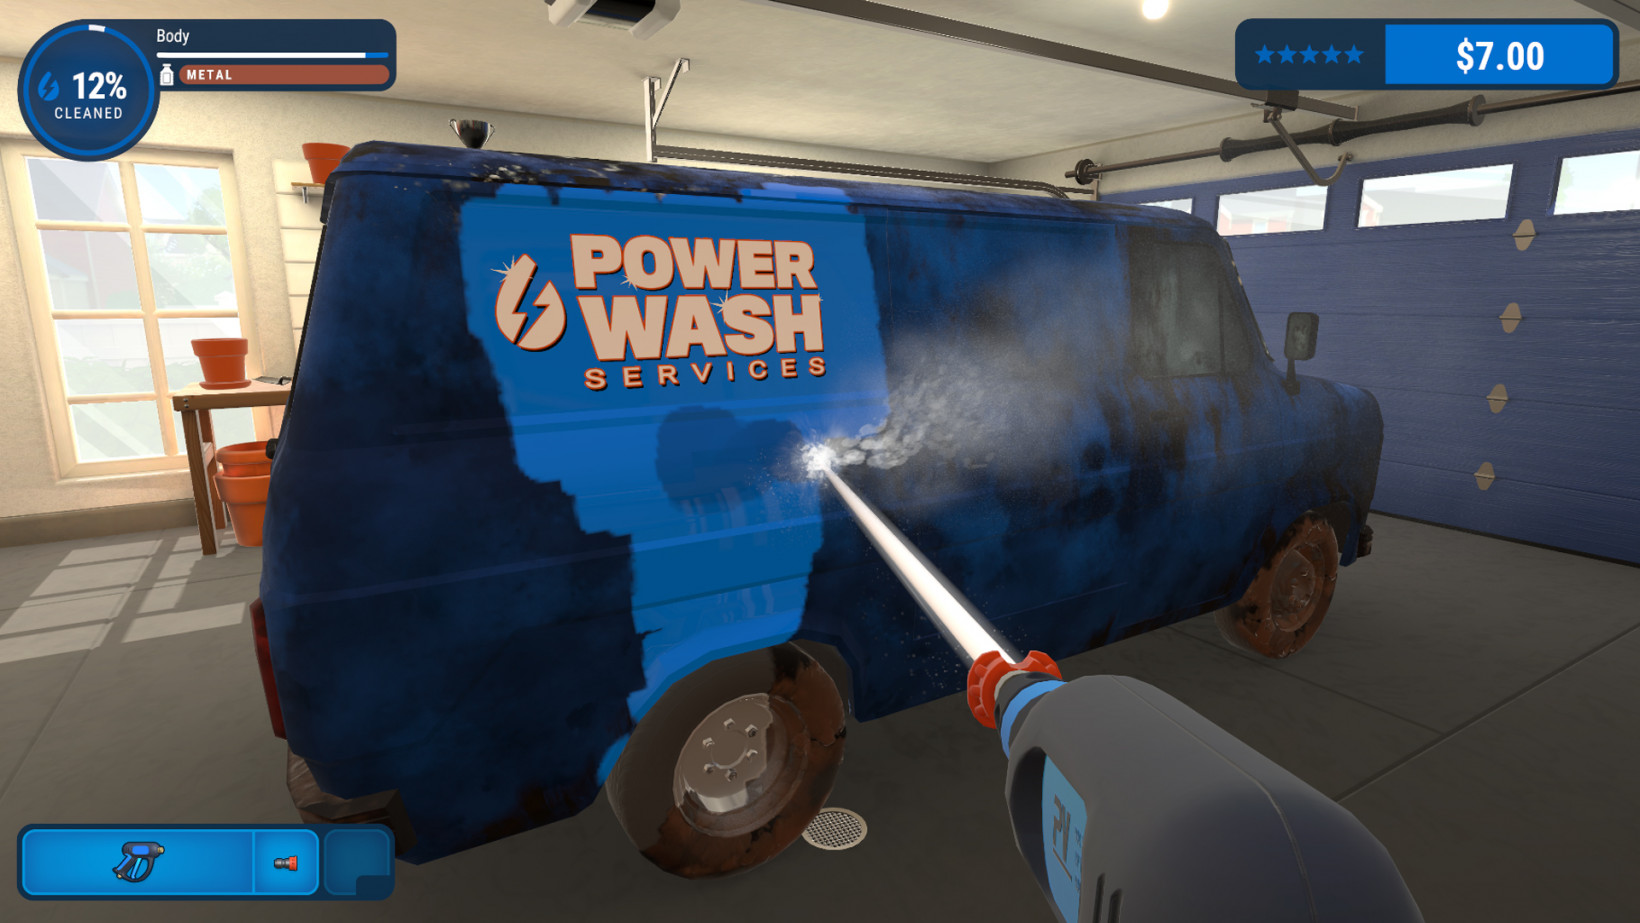 PowerWash Simulator's next free content update is out now